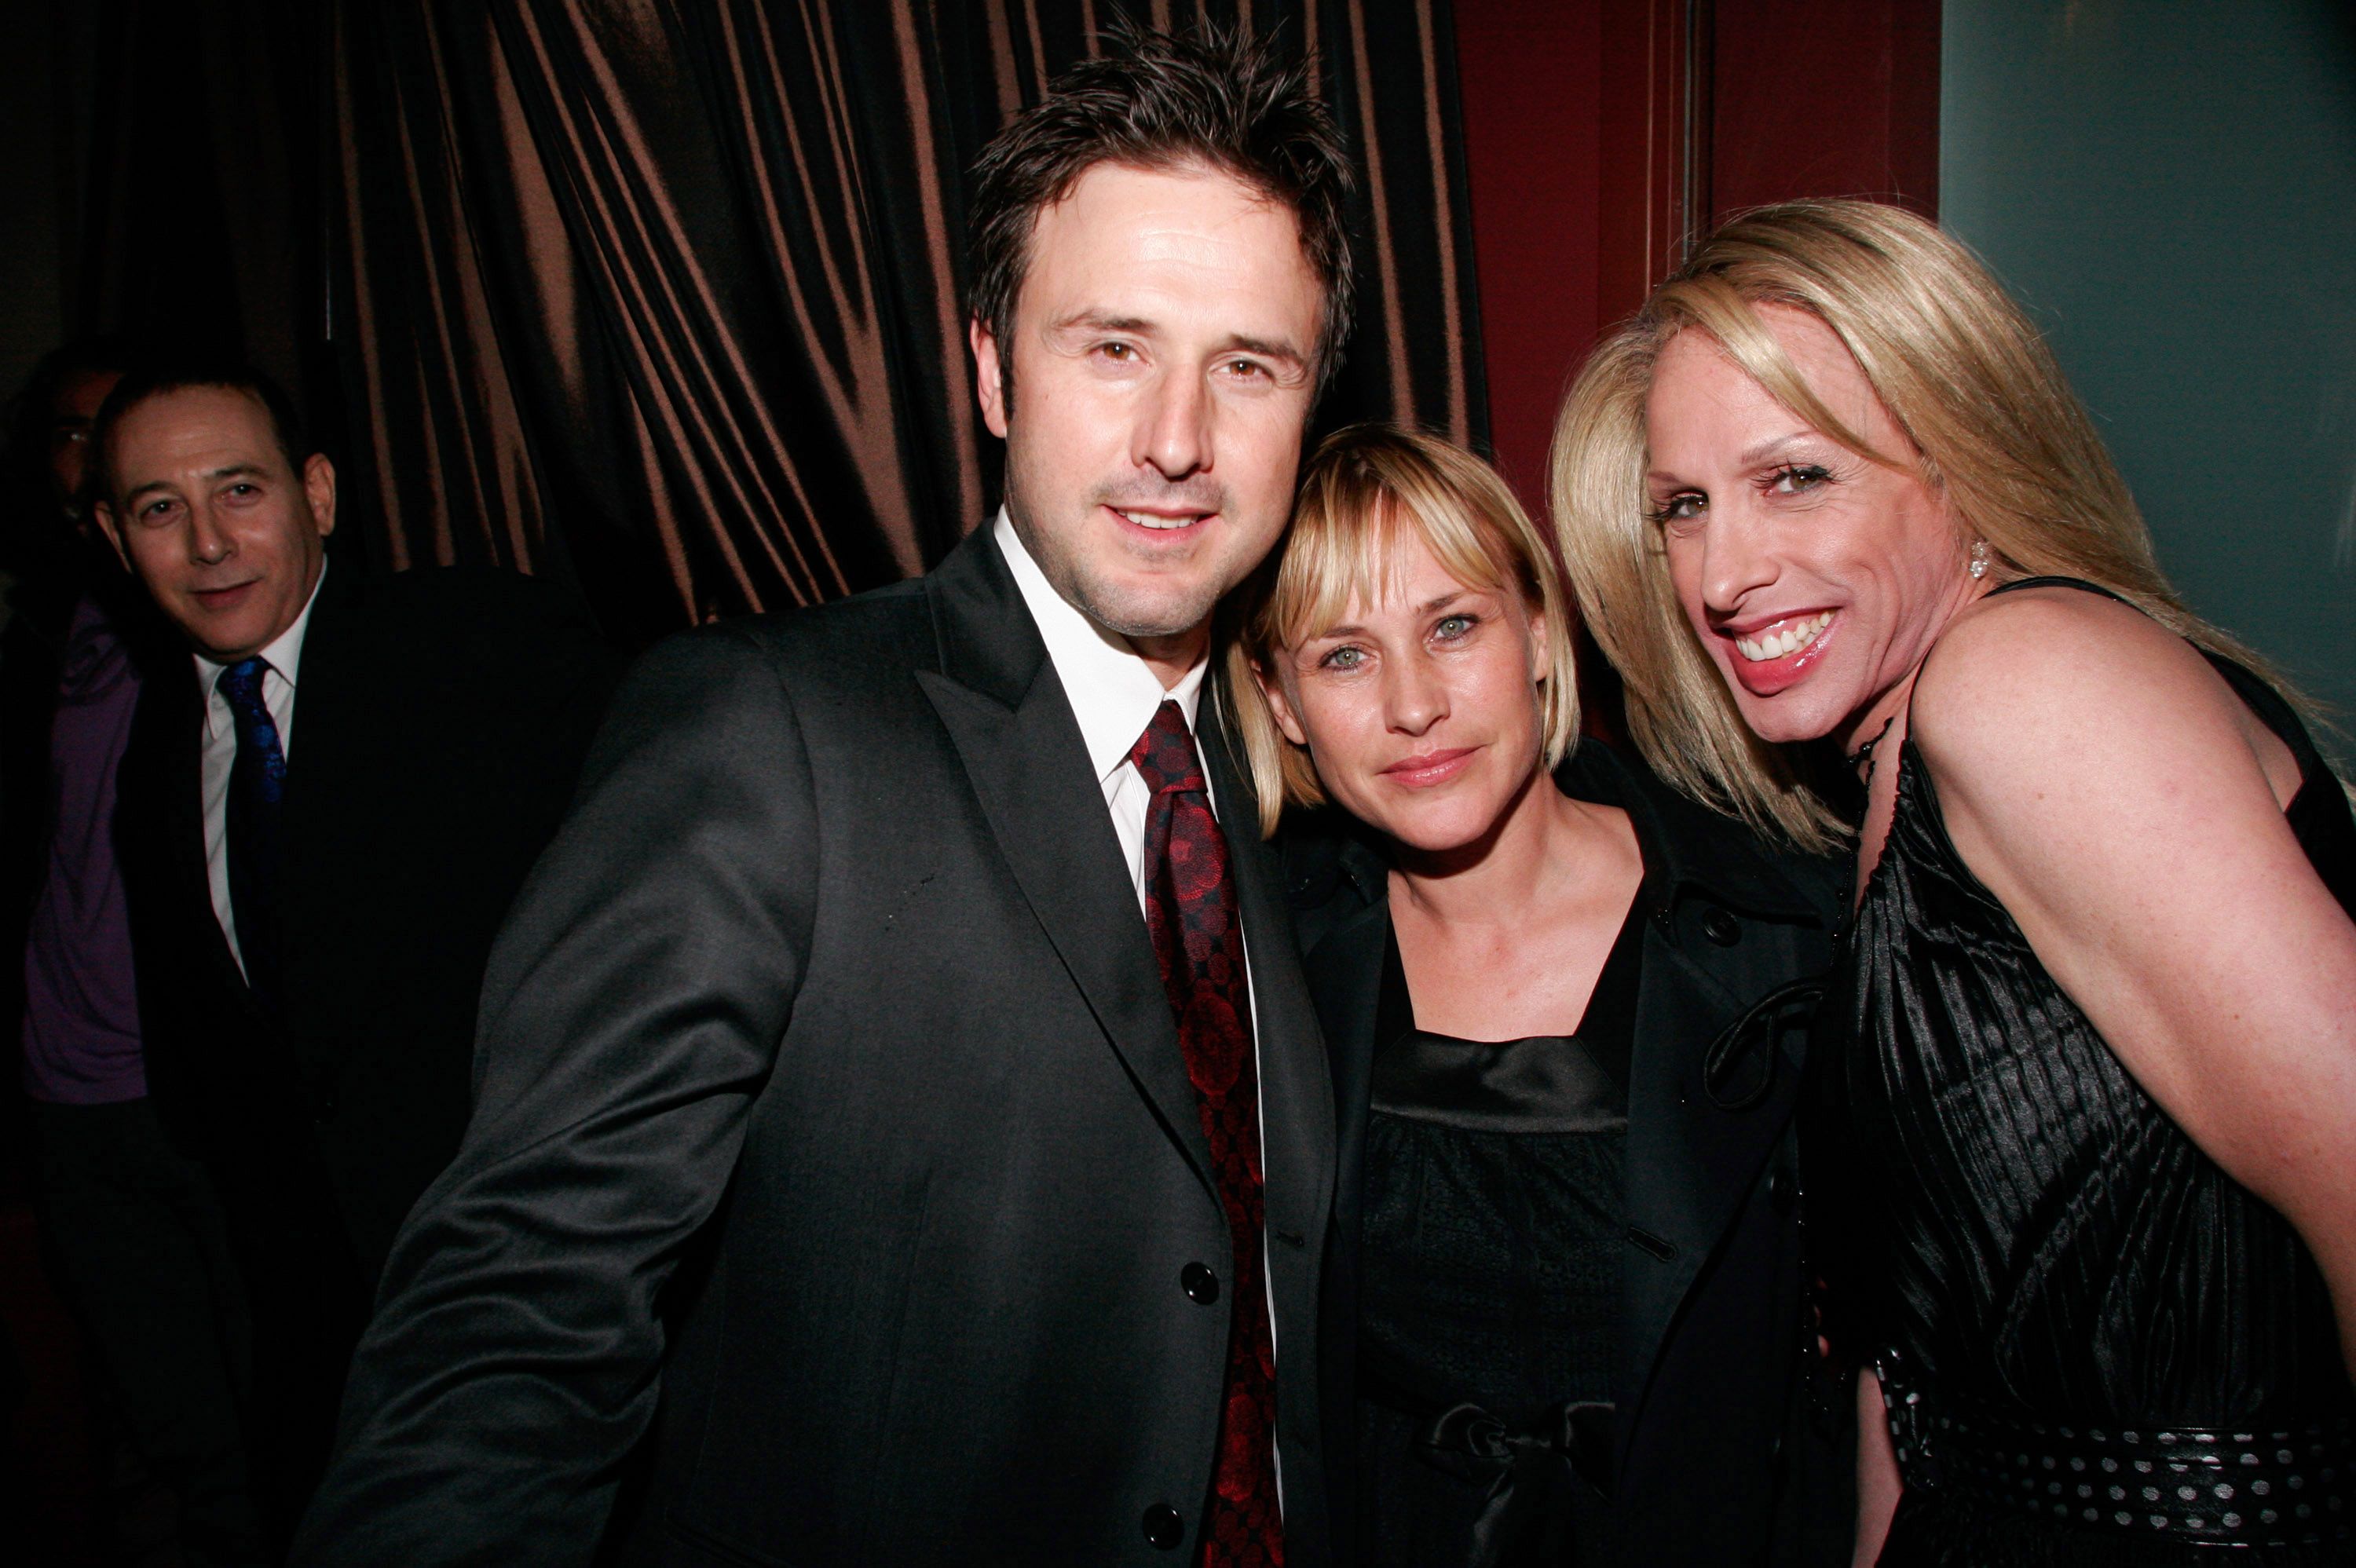 Alexis Arquette with siblings David Arquette, and Patricia Arquette | Source: Getty Images